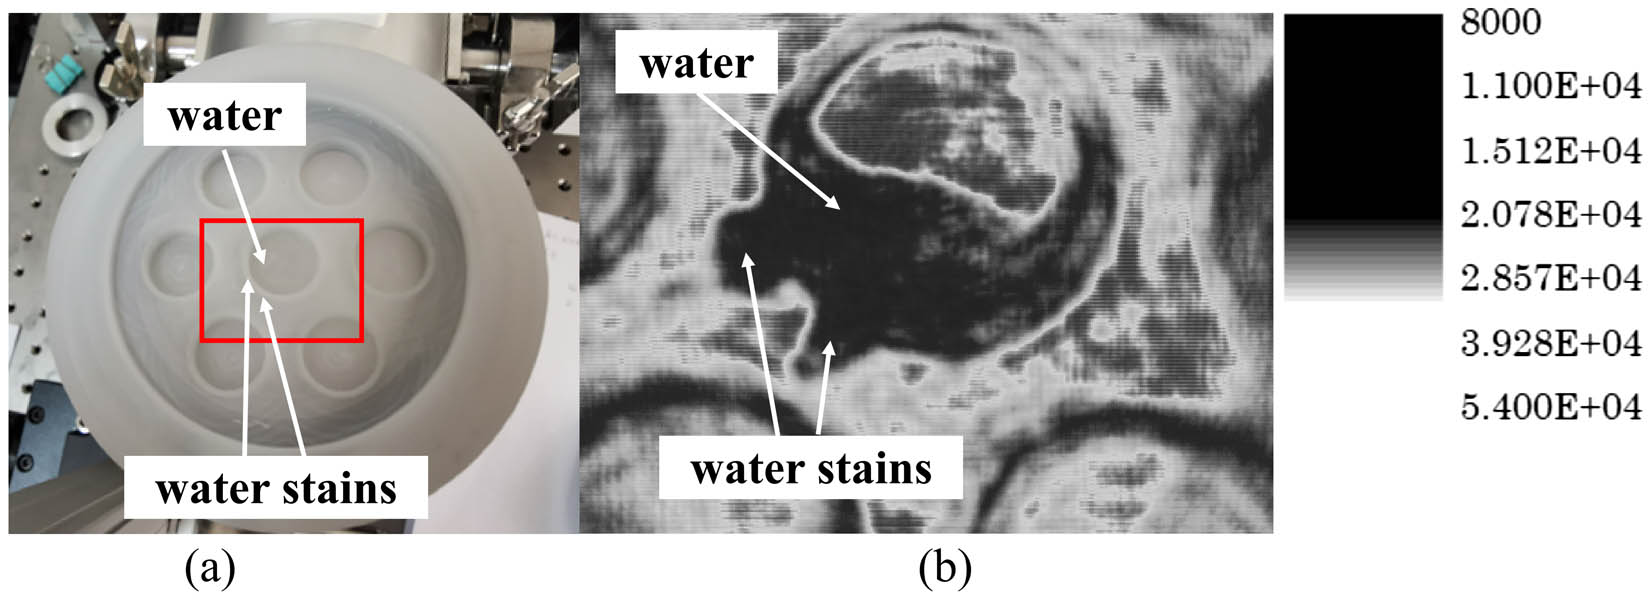 (a) Optical and (b) terahertz images of water and water stains on an HDPE sample cell.